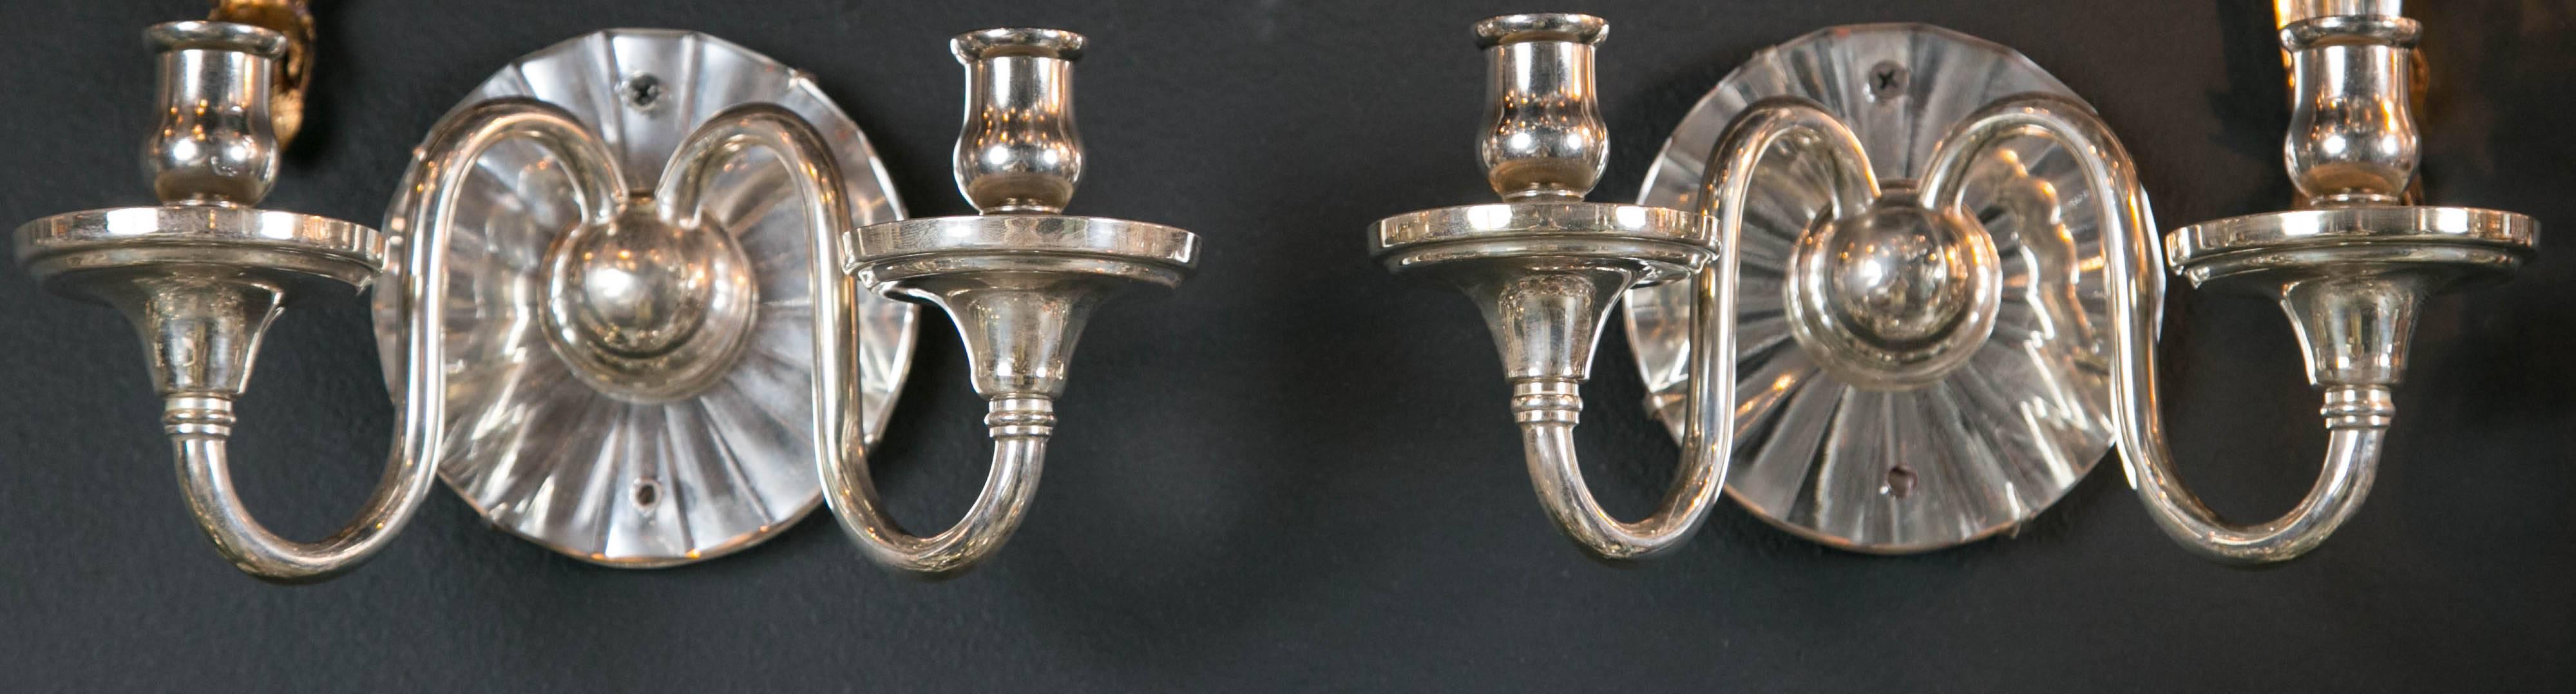 Caldwell sconces silver plated with cut mirrored backplate, circa 1920 12 available priced per pair.